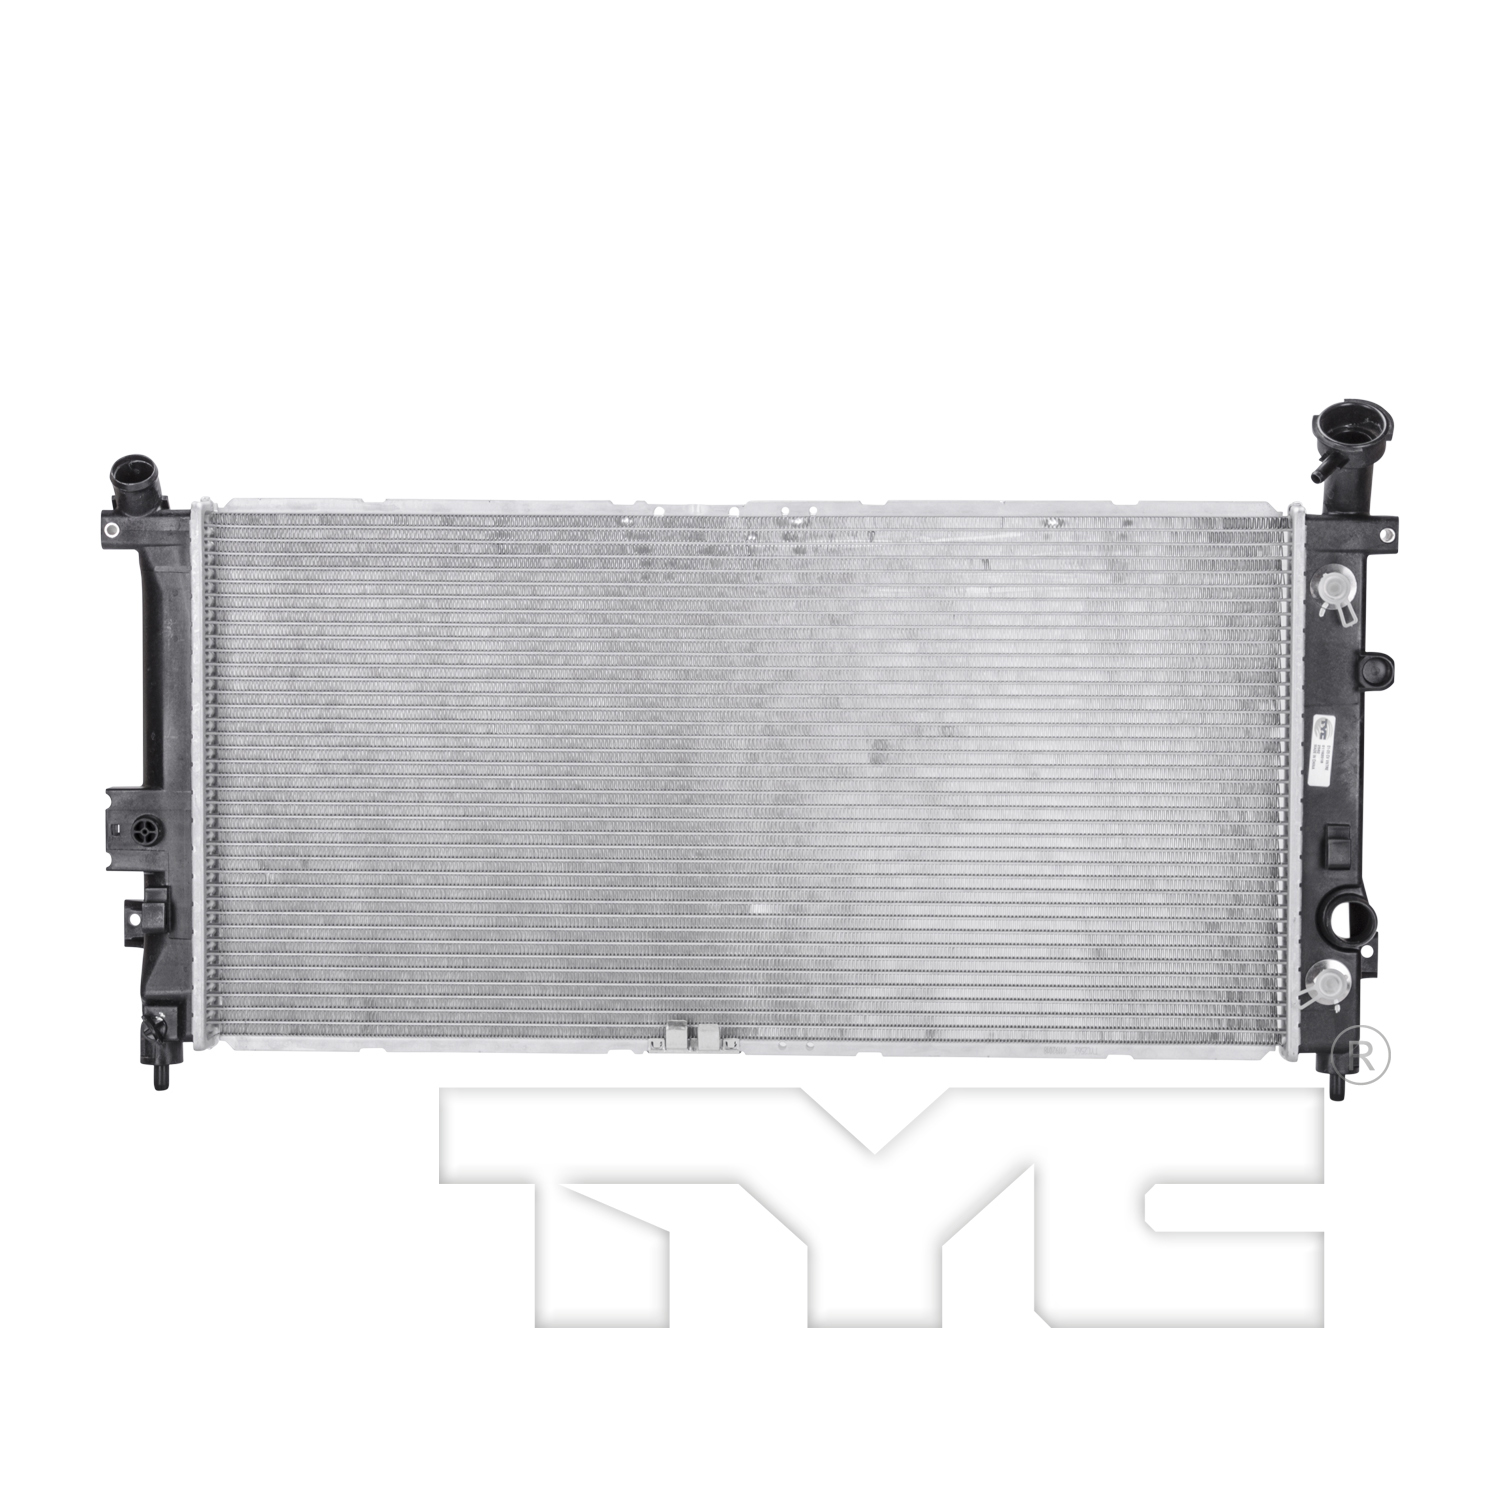 Aftermarket RADIATORS for BUICK - RENDEZVOUS, RENDEZVOUS,02-07,Radiator assembly